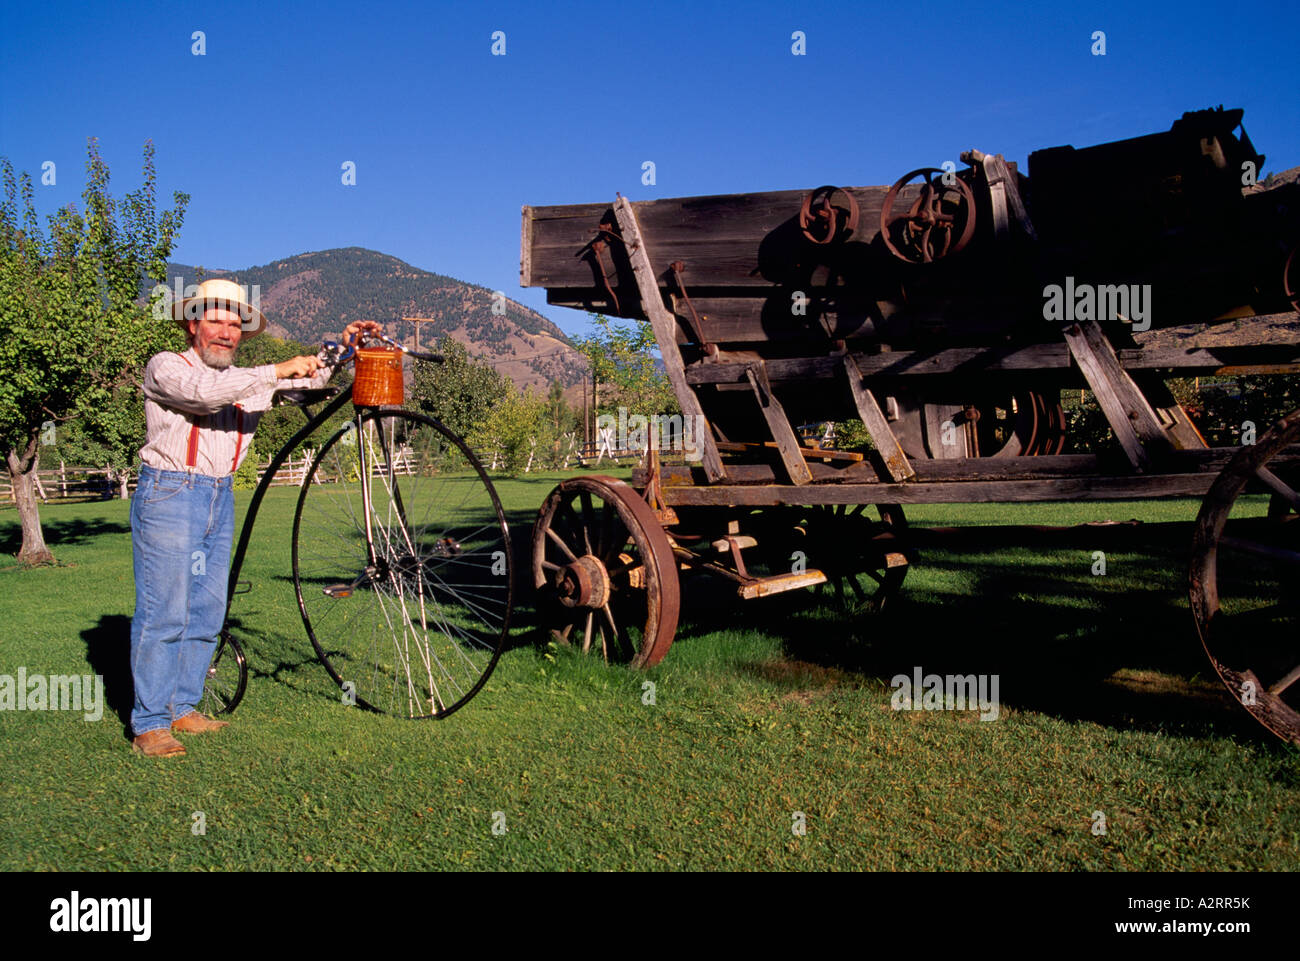 Keremeos, BC, Similkameen Valley, British Columbia, Canada - Man with Penny Farthing beside Old Wagon at Grist Mill and Gardens Stock Photo